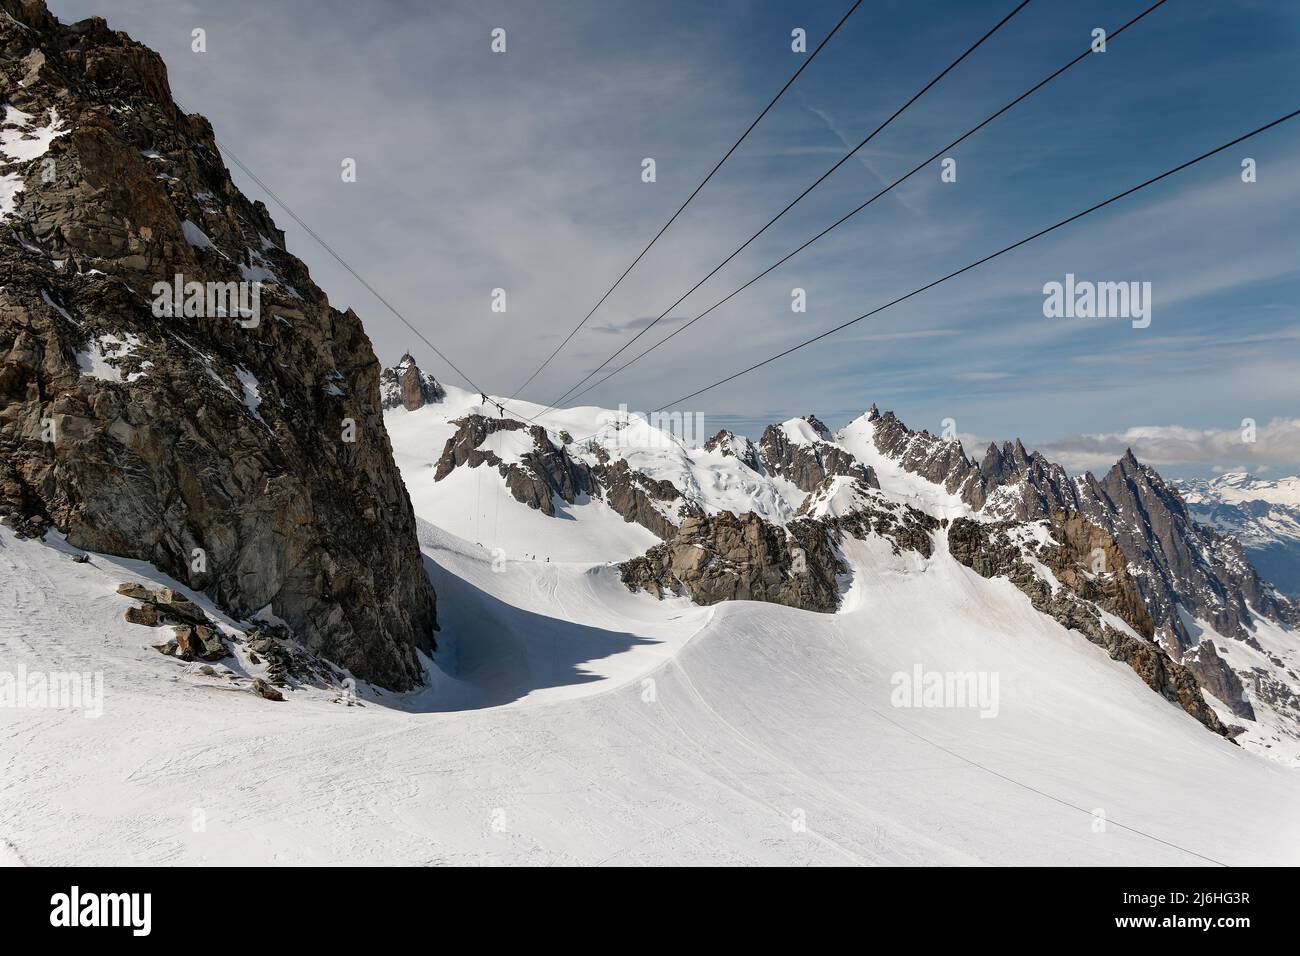 The suspended support pillar of the Vallée Blanche cable car, anchored between the rocks of the Large and the Small Flambeau. Stock Photo